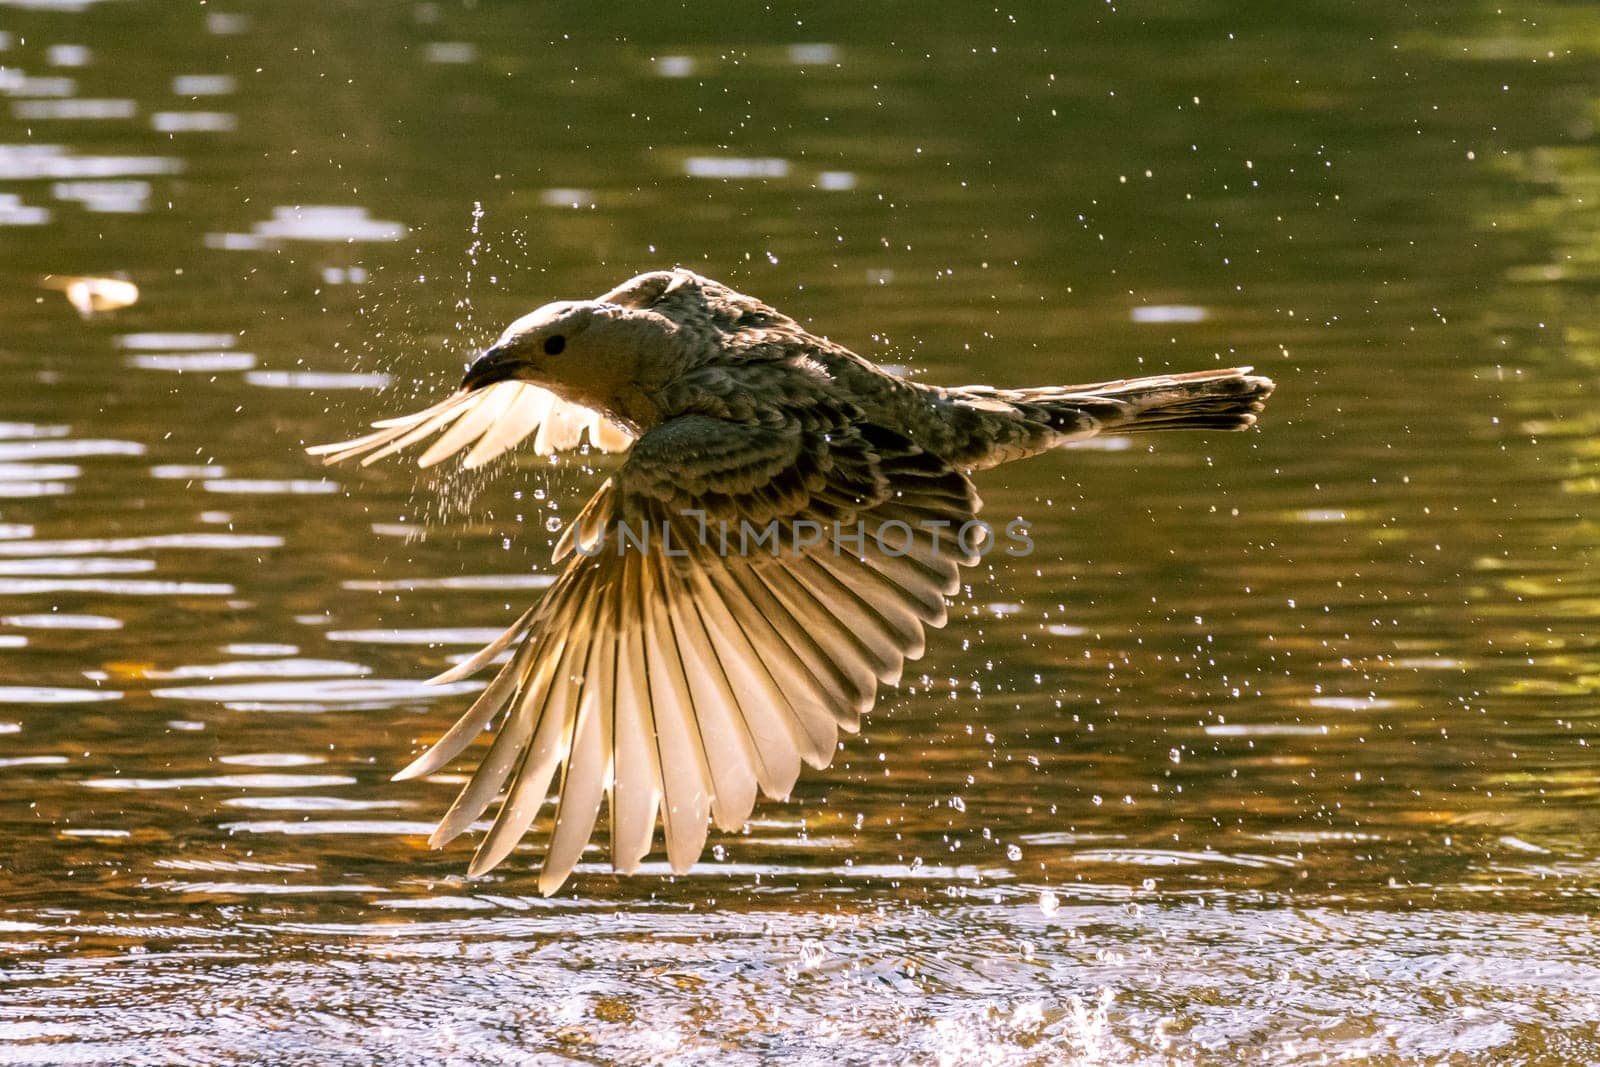 Great bowerbird in flight over water, Australia by StefanMal